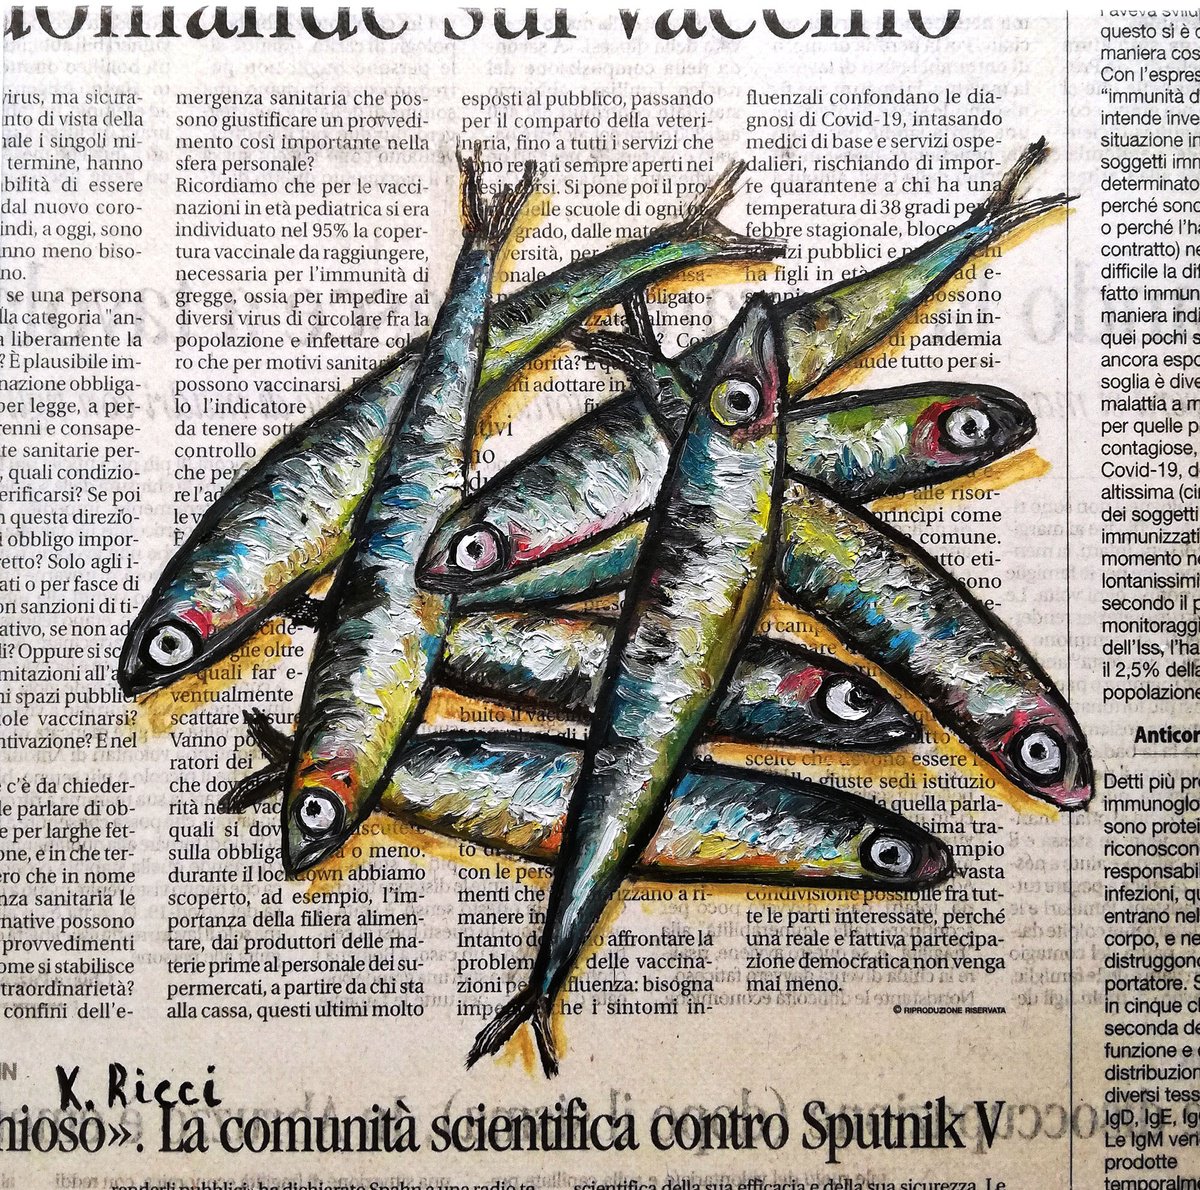 Mixed Anchovies on Newspaper Original Oil on Canvas Board Painting 8 by 8 inches (20x20... by Katia Ricci